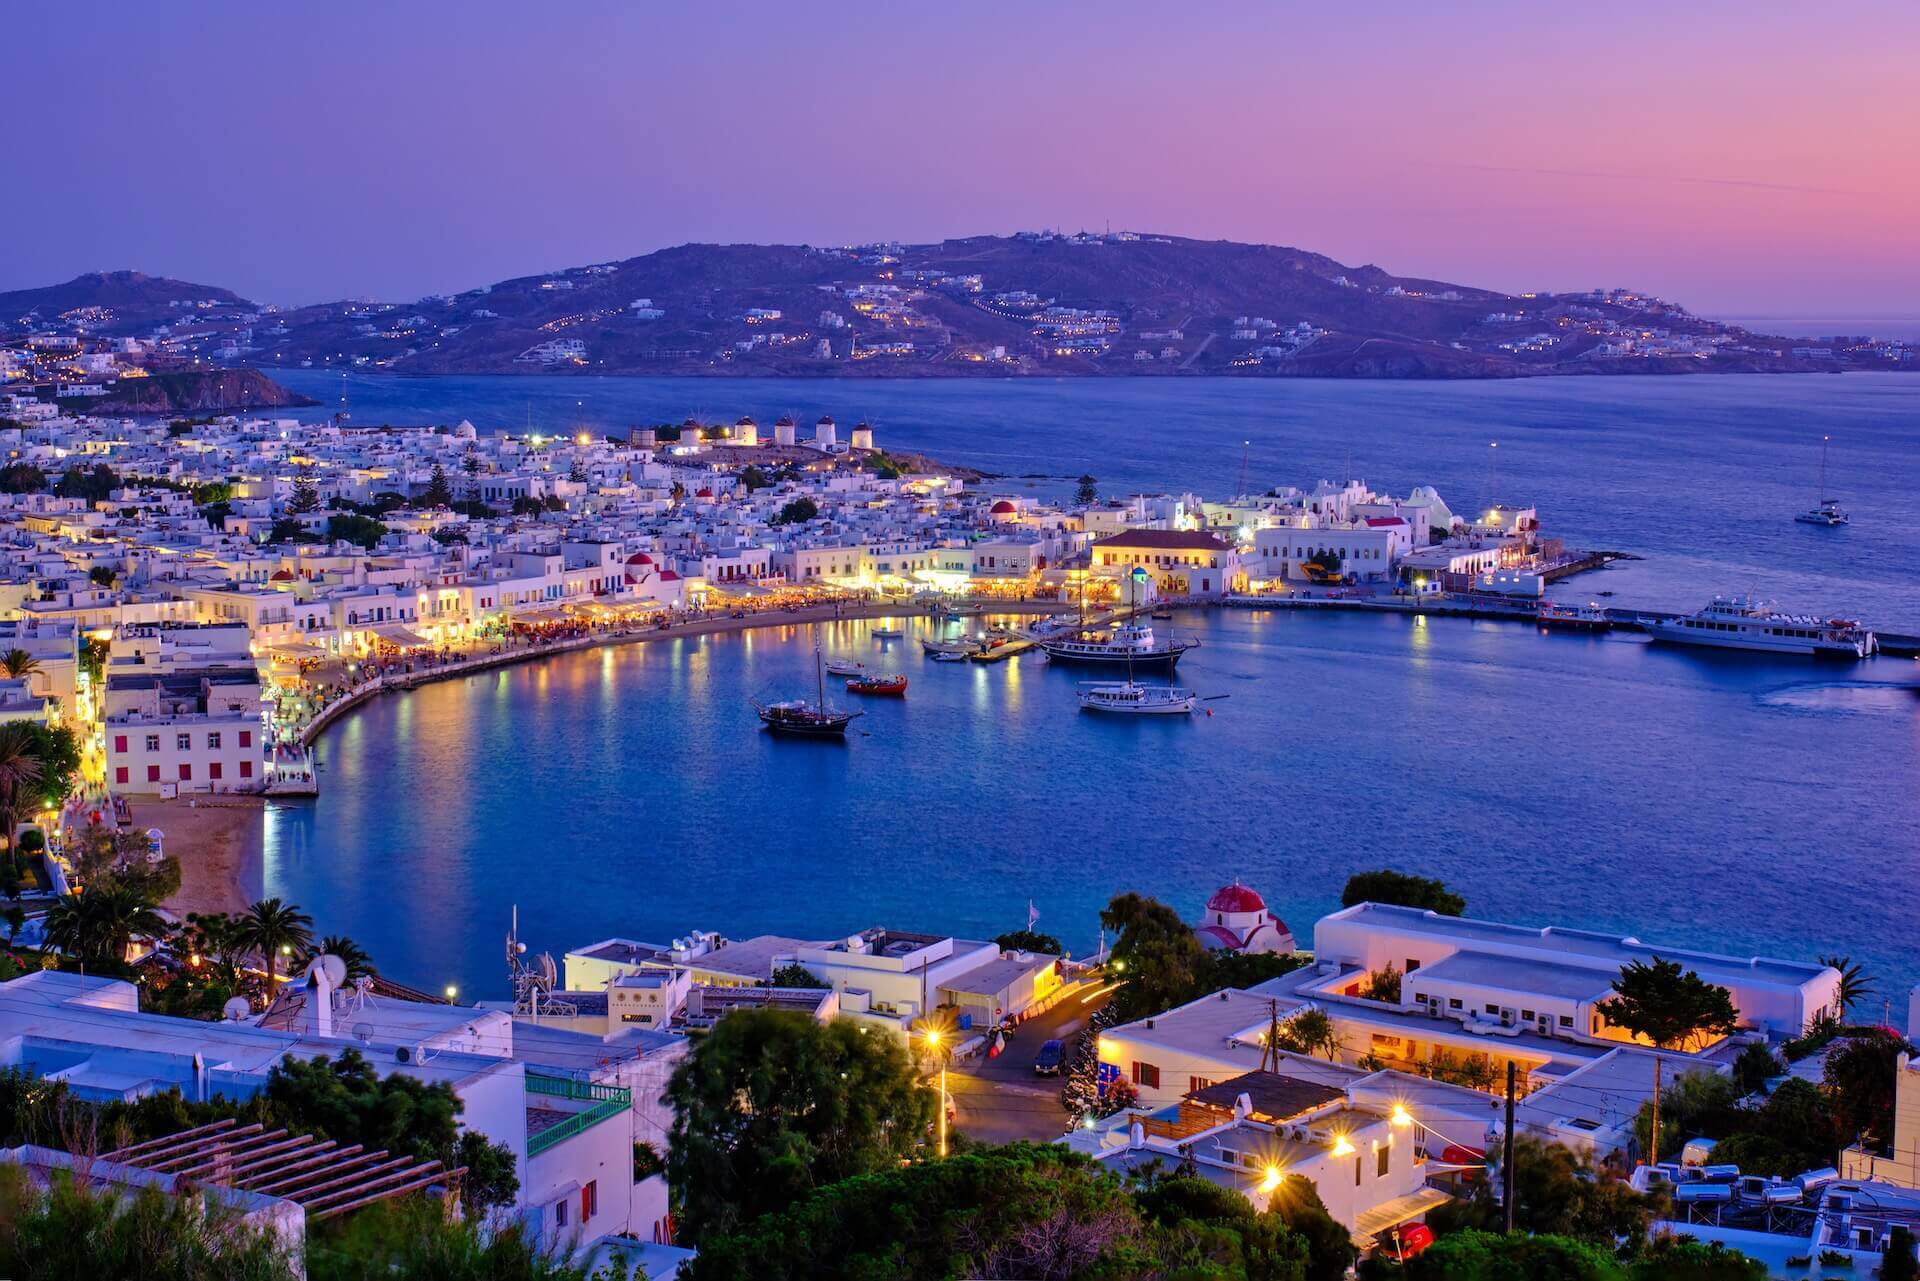 The island of Mykonos at sunset